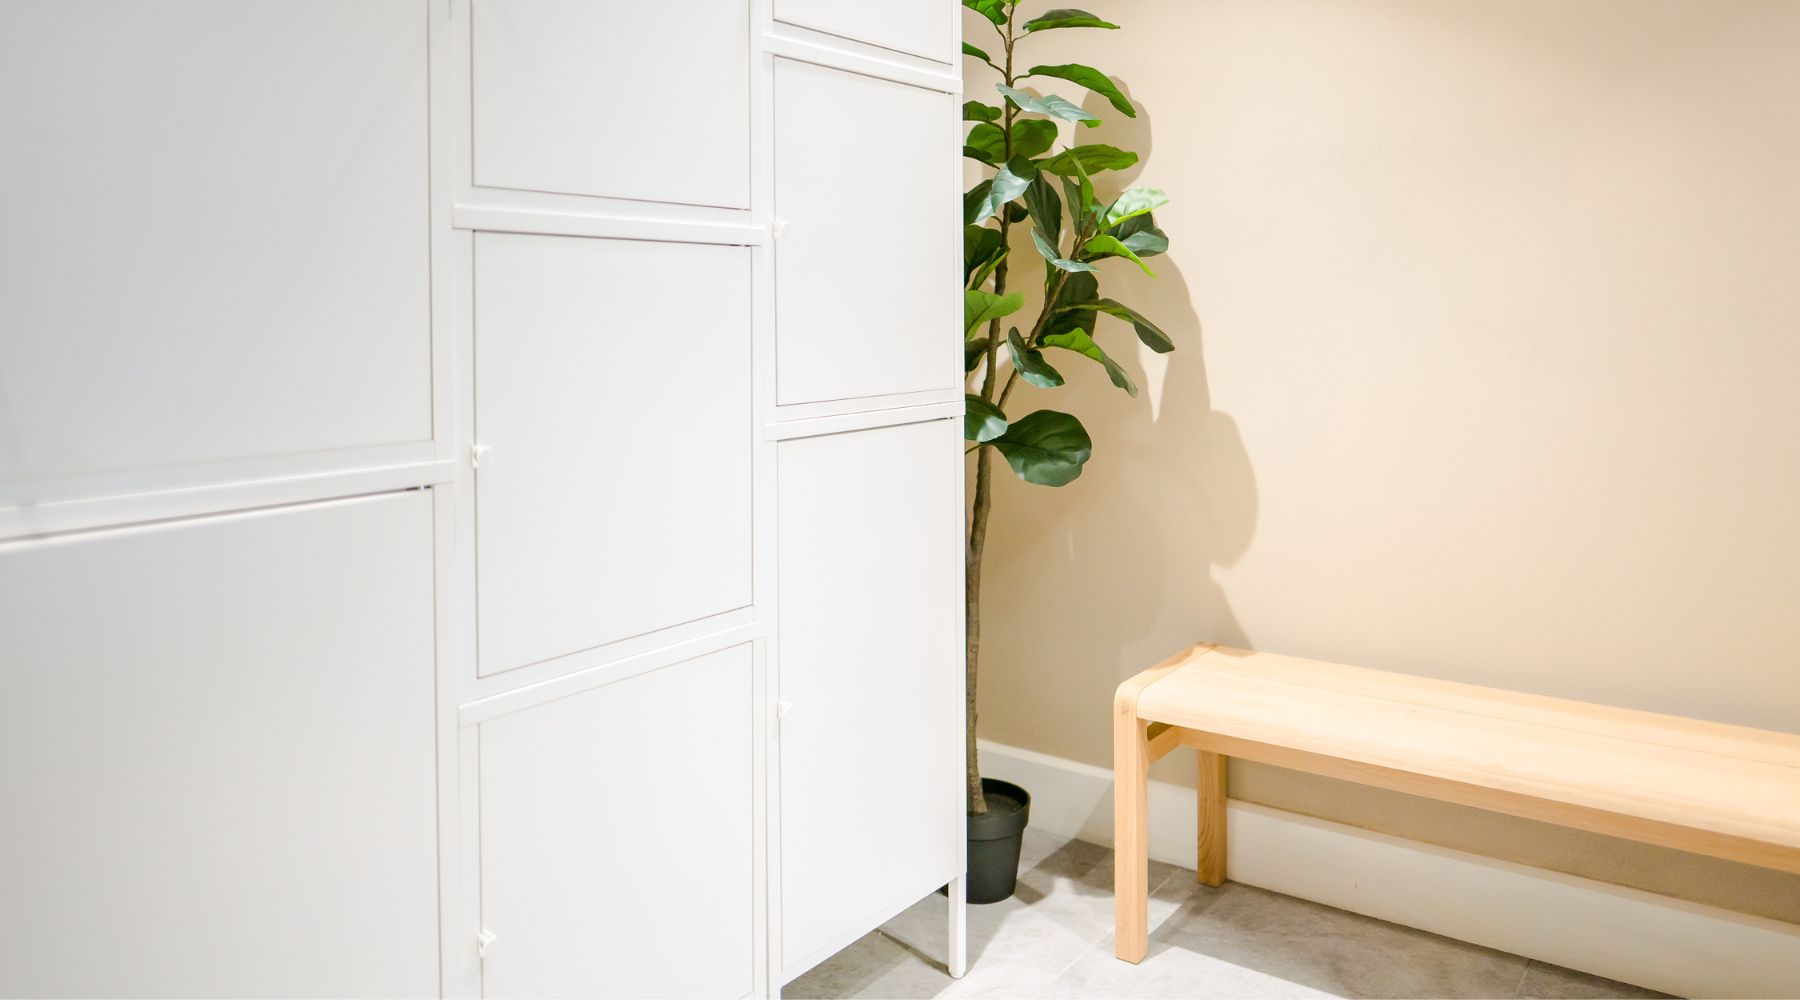 Lockers in the VIM Health changing room including biophilia and wooden bench.